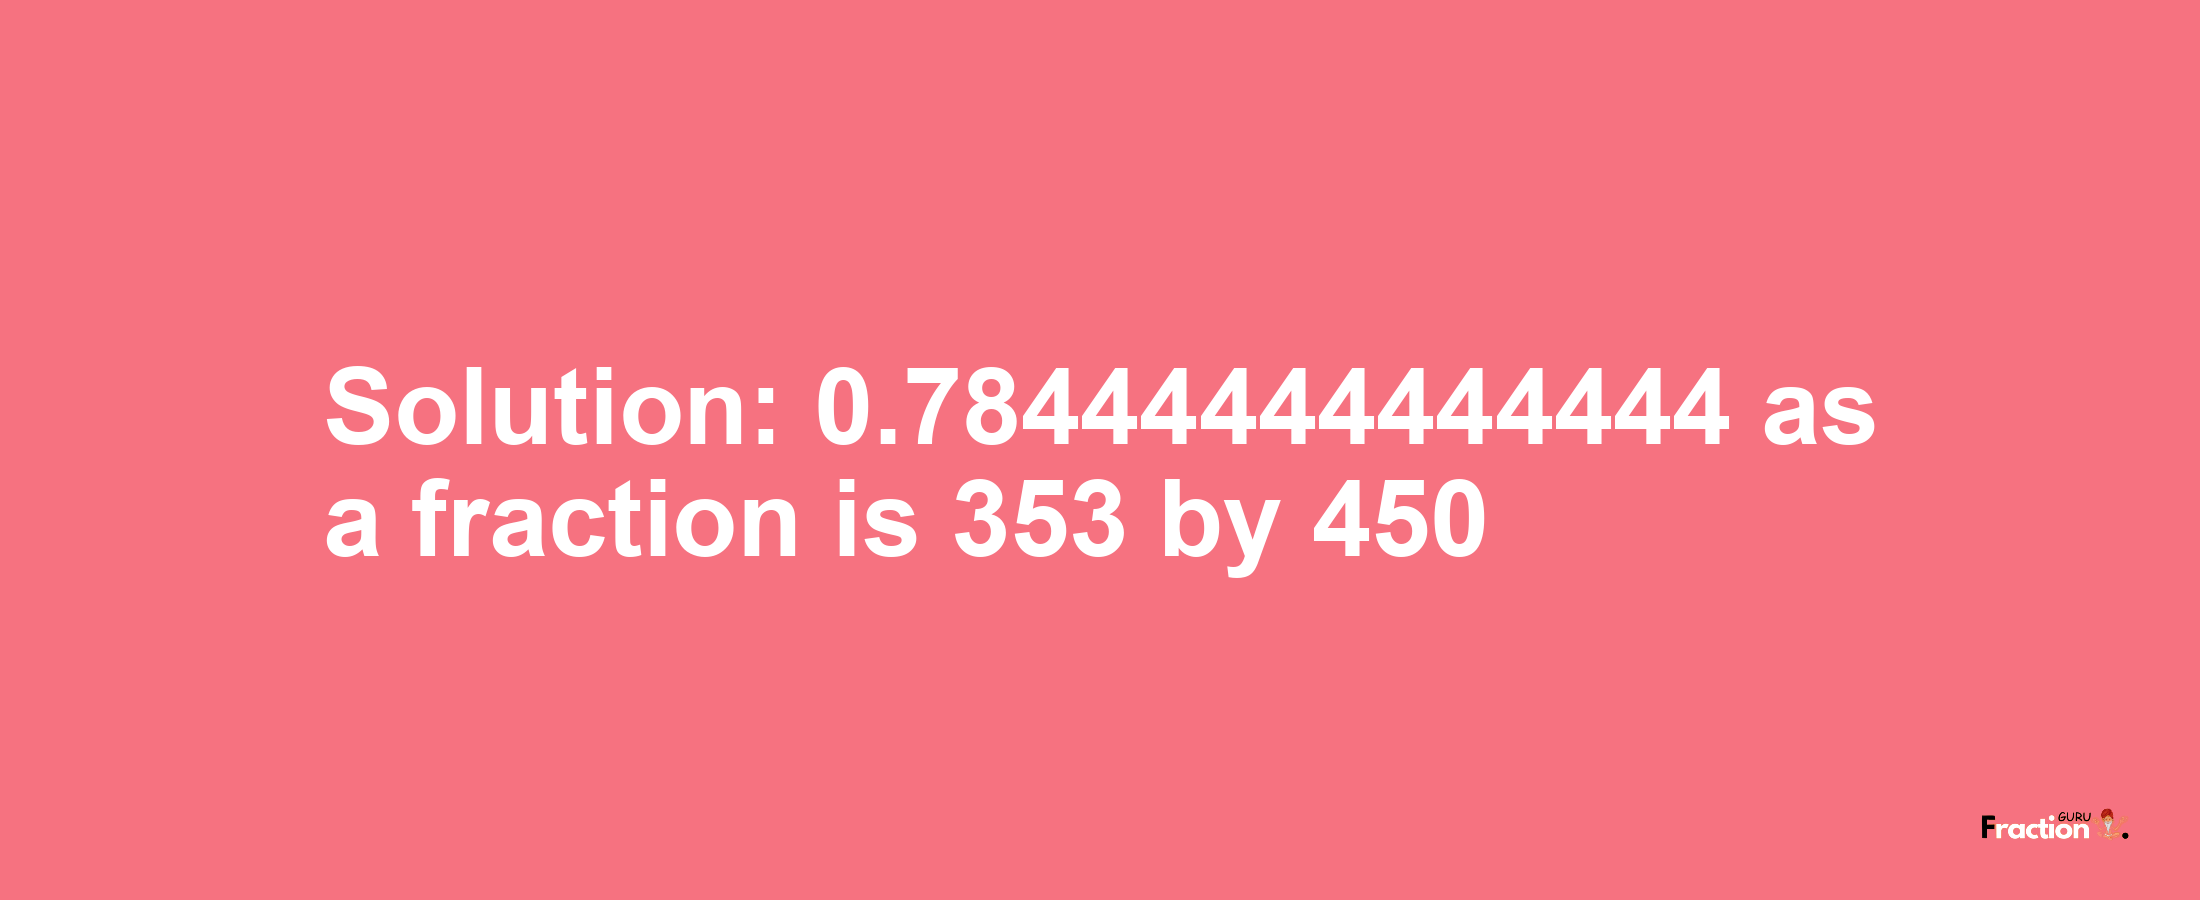 Solution:0.78444444444444 as a fraction is 353/450